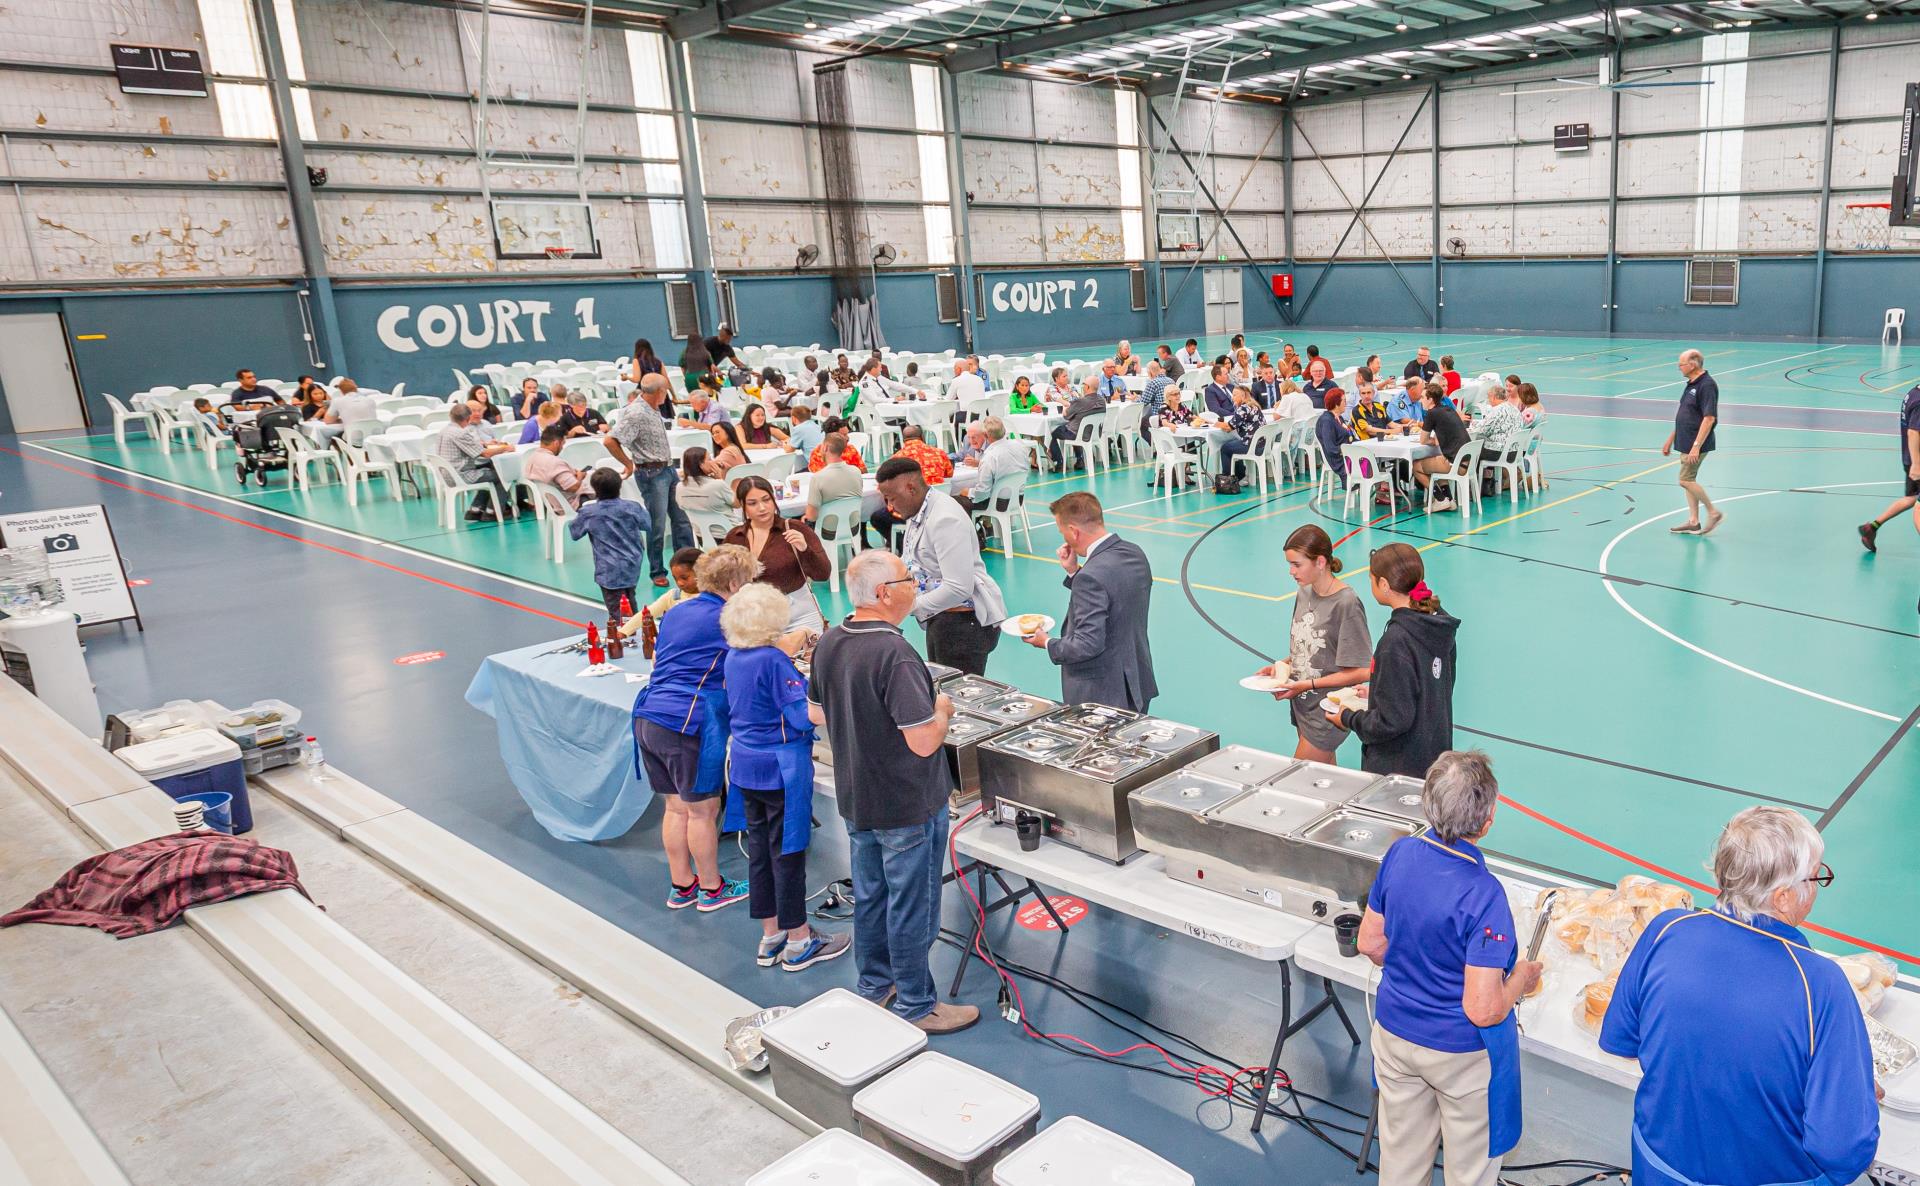 An indoor basketball court set with tables and chairs, people of all ages are seated at the tables. In the front right a buffet is set up and people are serving food.